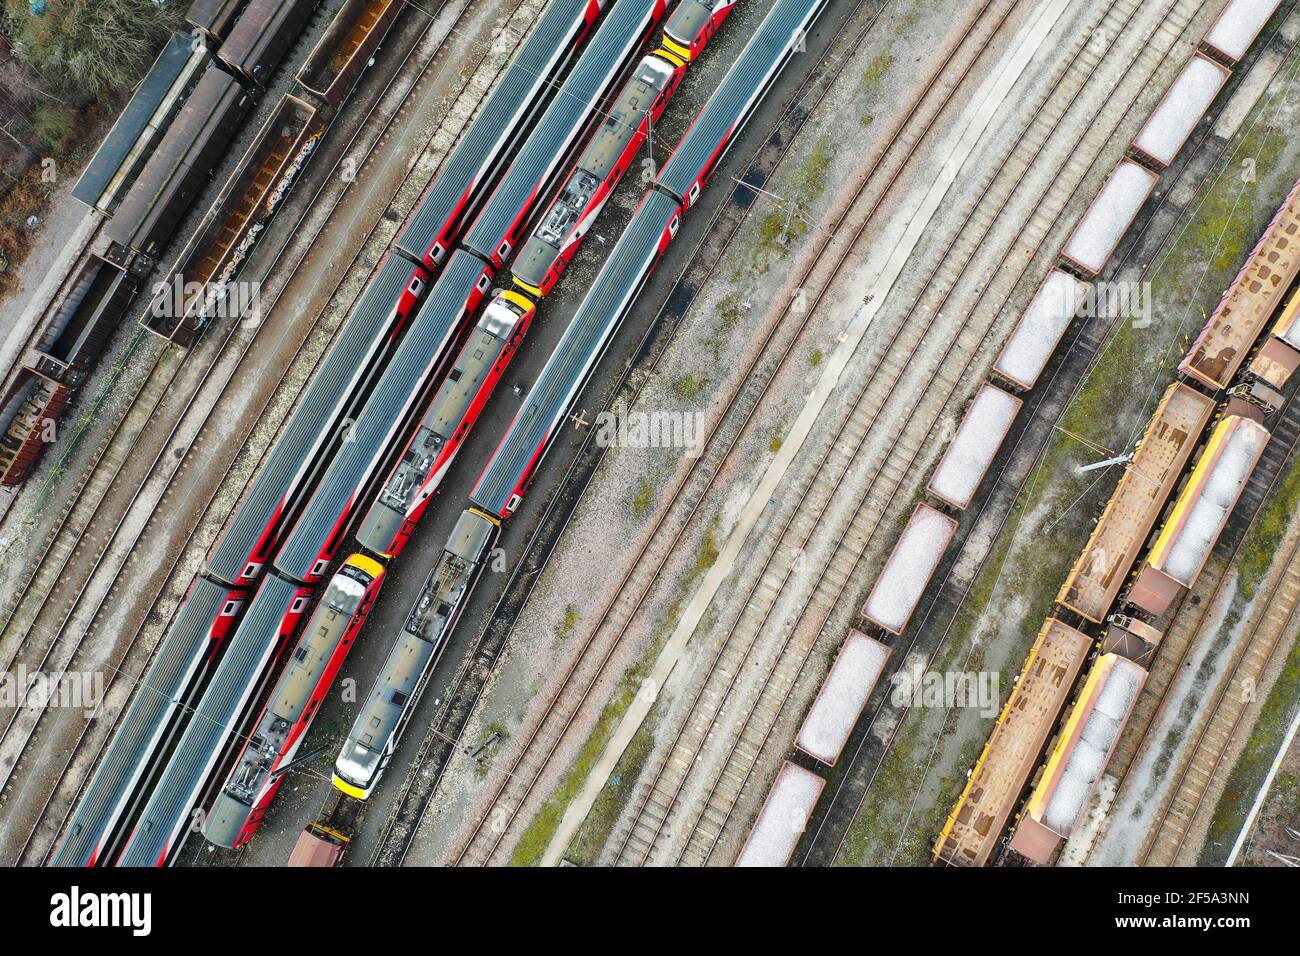 An aerial birds eye view of trains, carriages and trucks stabled in a UK freight railway sidings with copy space Stock Photo